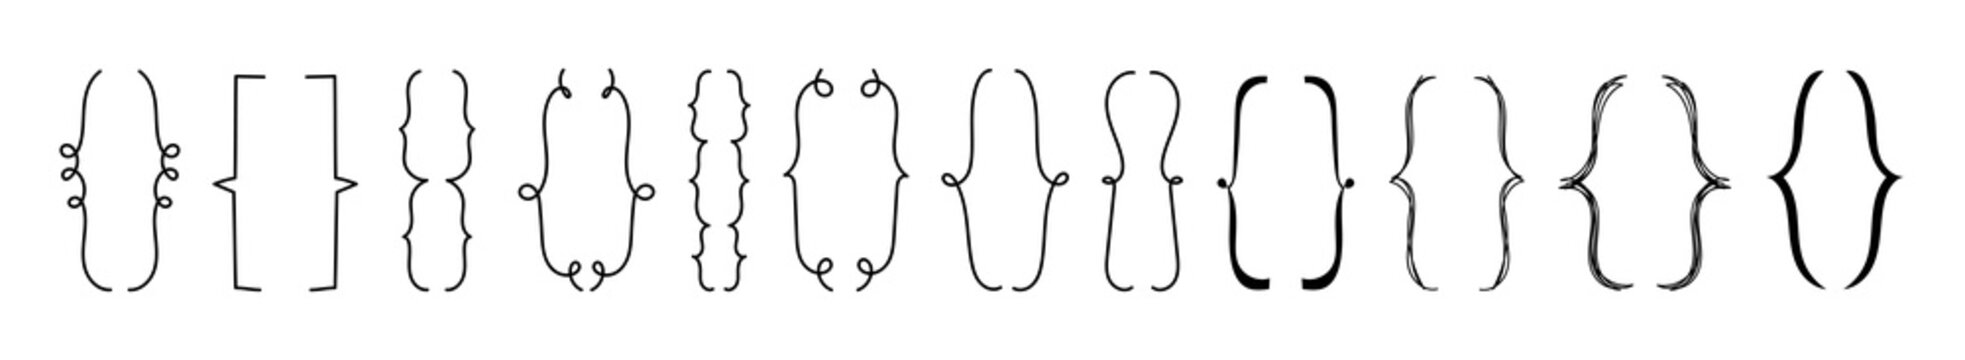 Doodle set of curly braces for text. Hand-drawn brackets in various shapes. Vector doodle illustration of rounded and double parentheses isolated on white.